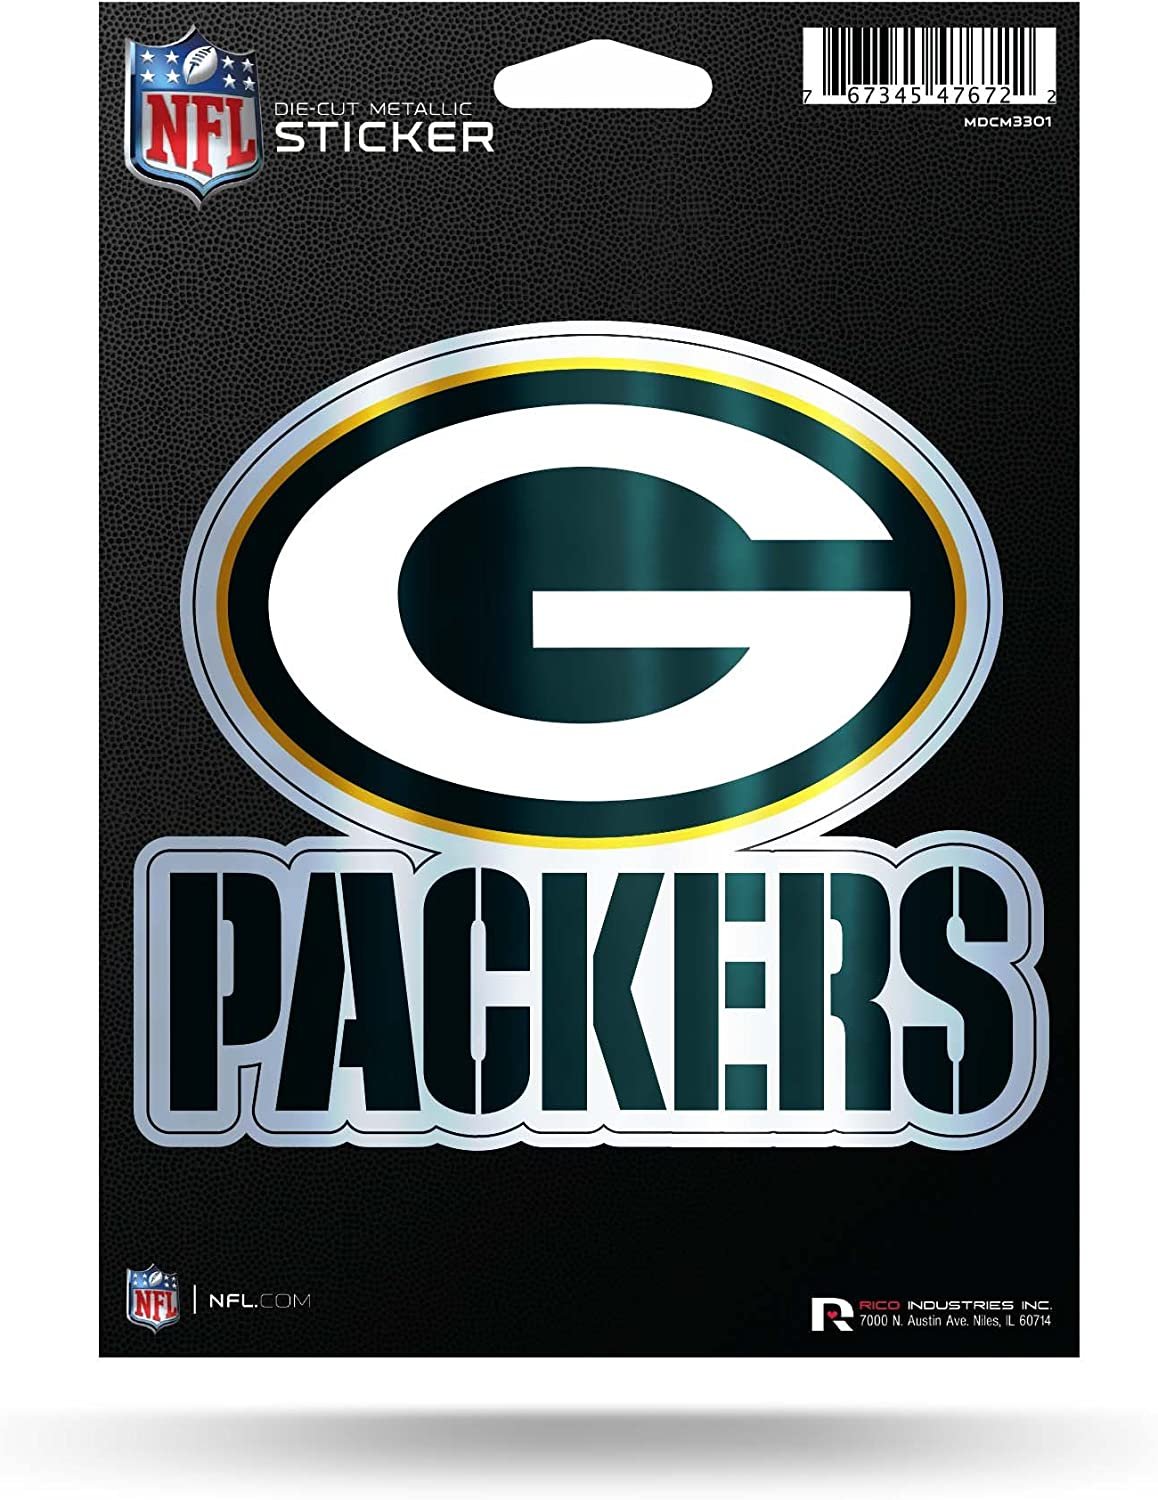 Green Bay Packers 5 Inch Die Cut Decal Sticker, Metallic Shimmer Design, Full Adhesive Backing